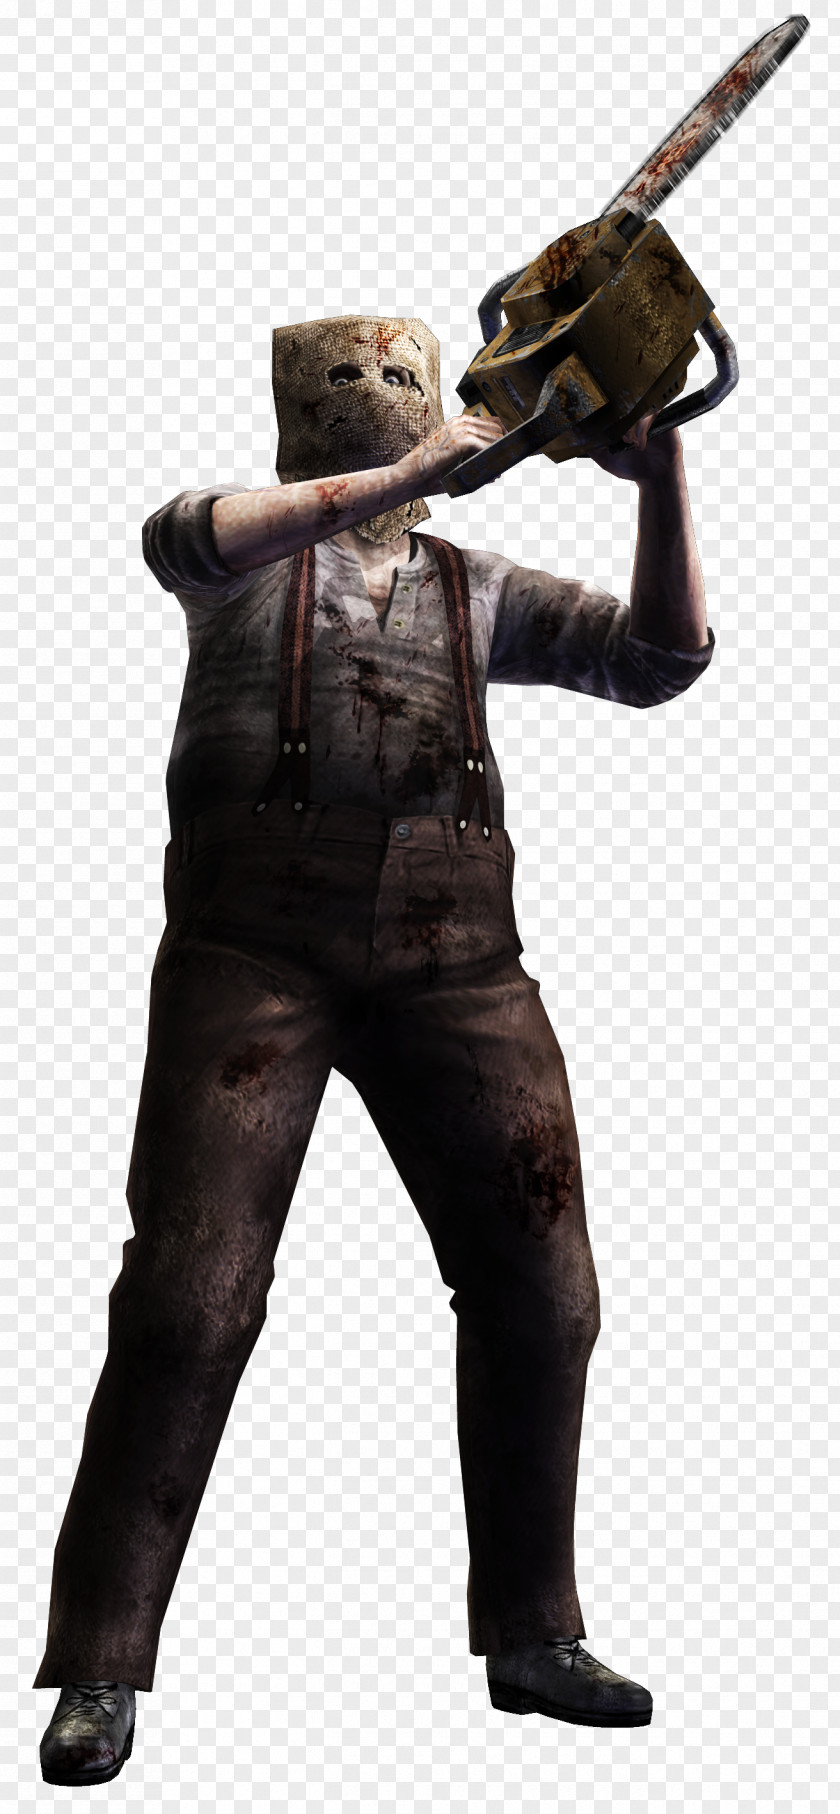 Chainsaw Resident Evil 4 3: Nemesis 2 Leon S. Kennedy PNG